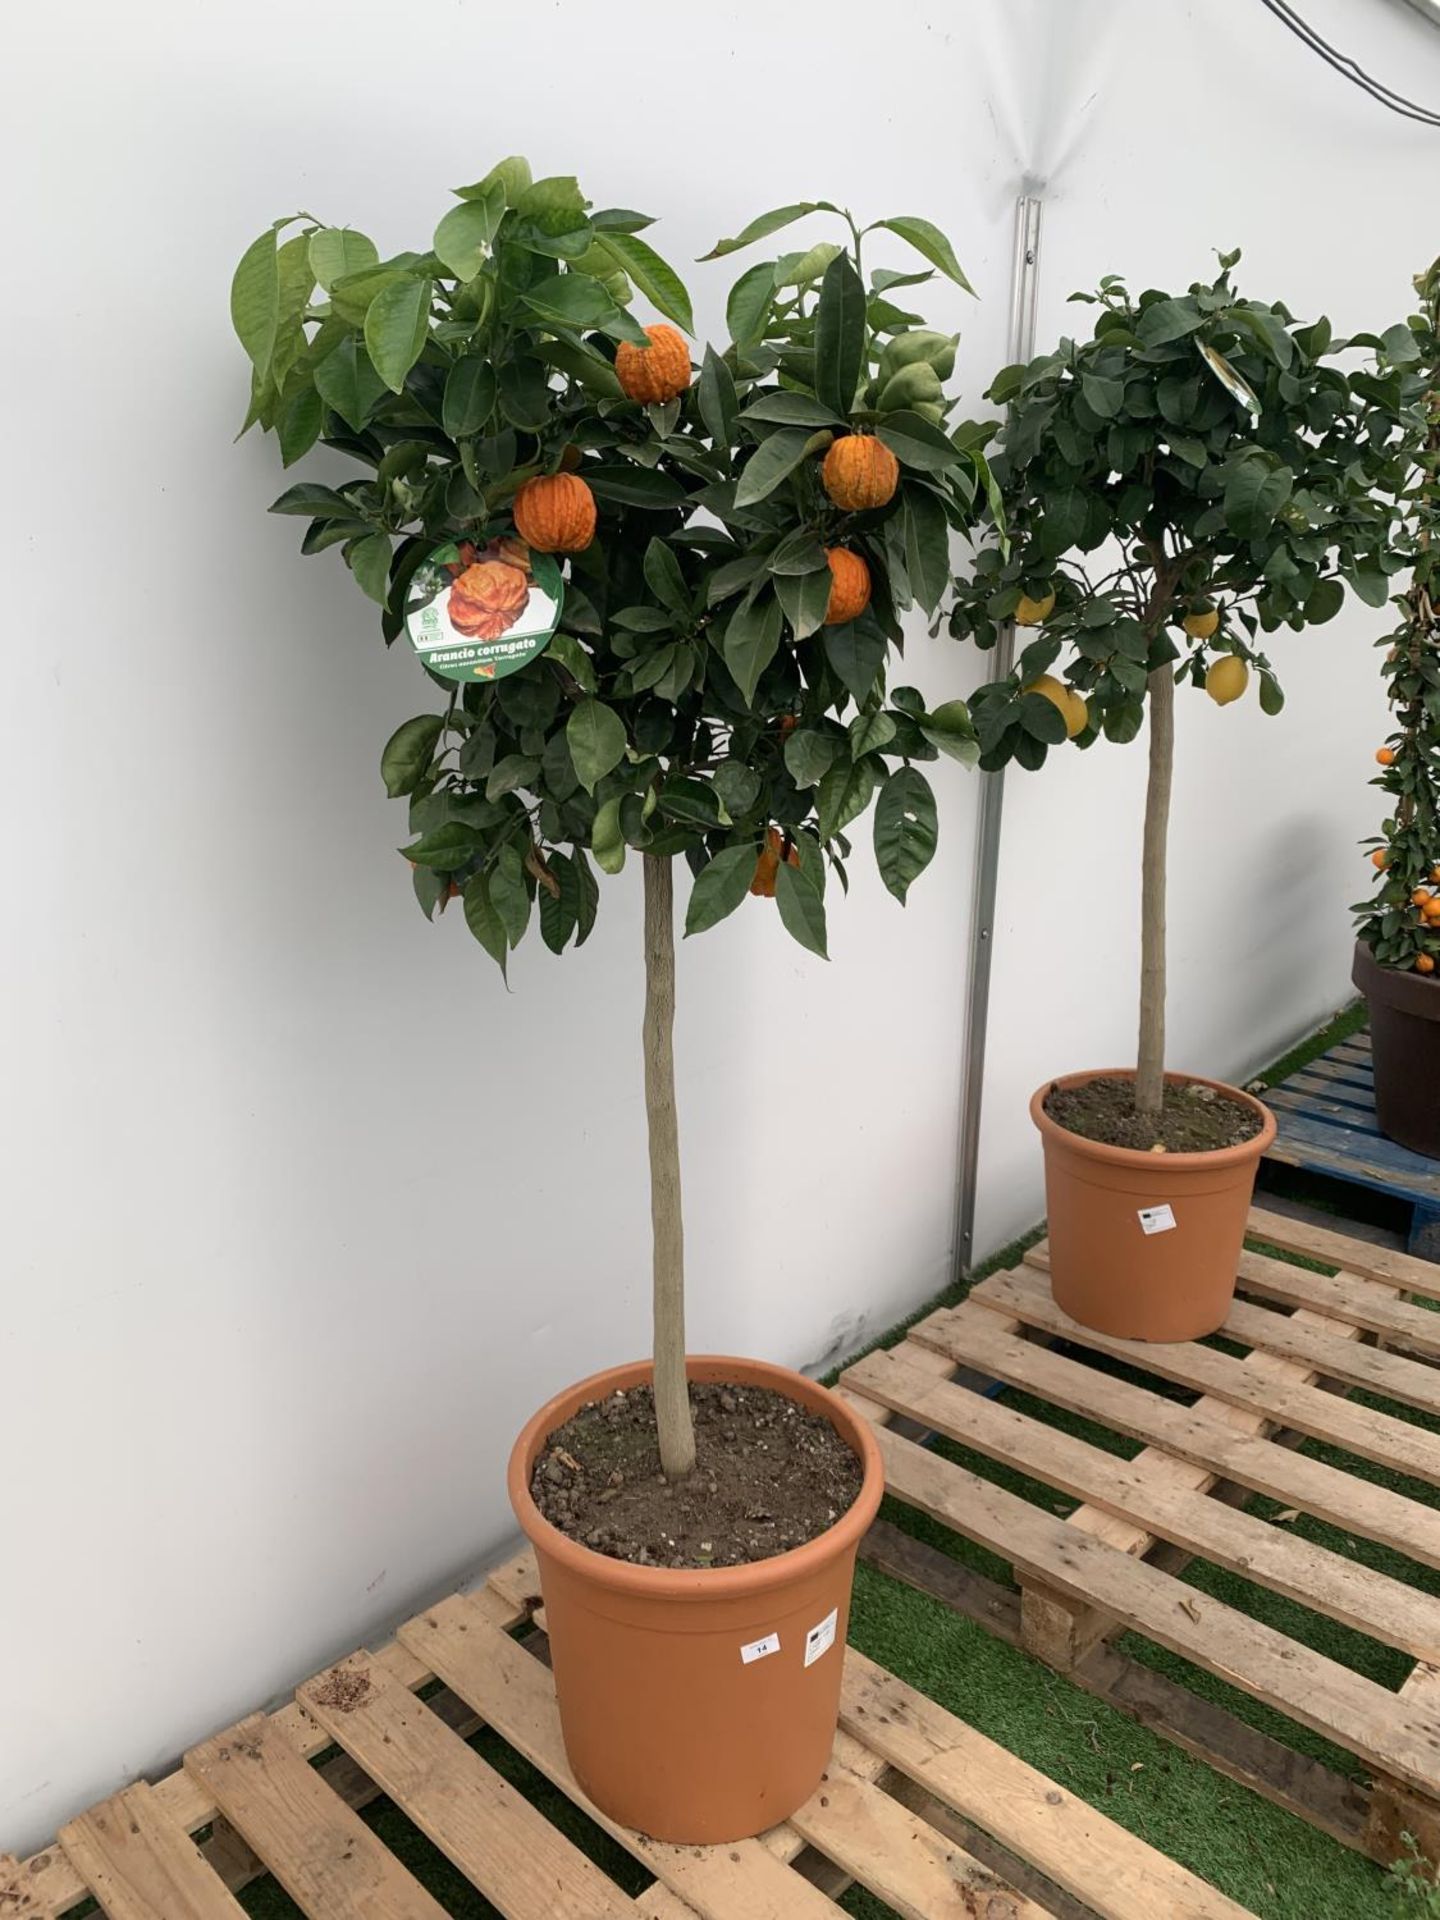 ONE ARANCIO CORRUGATO RARE CITRUS ORANGE FRUIT TREE WITH FRUIT APPROX 150CM IN HEIGHT IN A 25LTR POT - Image 9 of 9